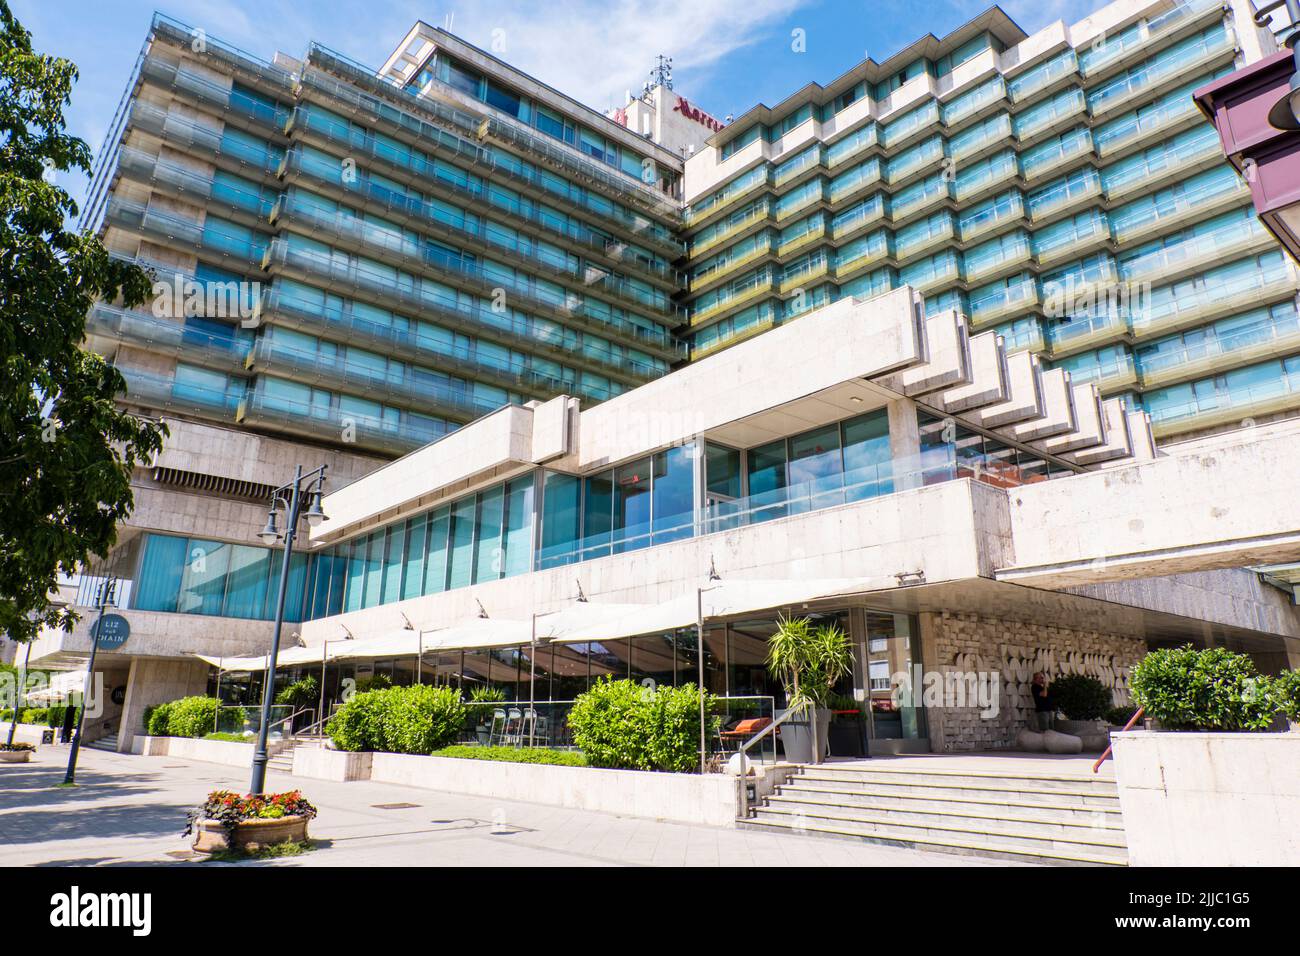 Hotel Marriott, in a buildng dating from 1969, Belvaros, Budapest, Hungary Stock Photo